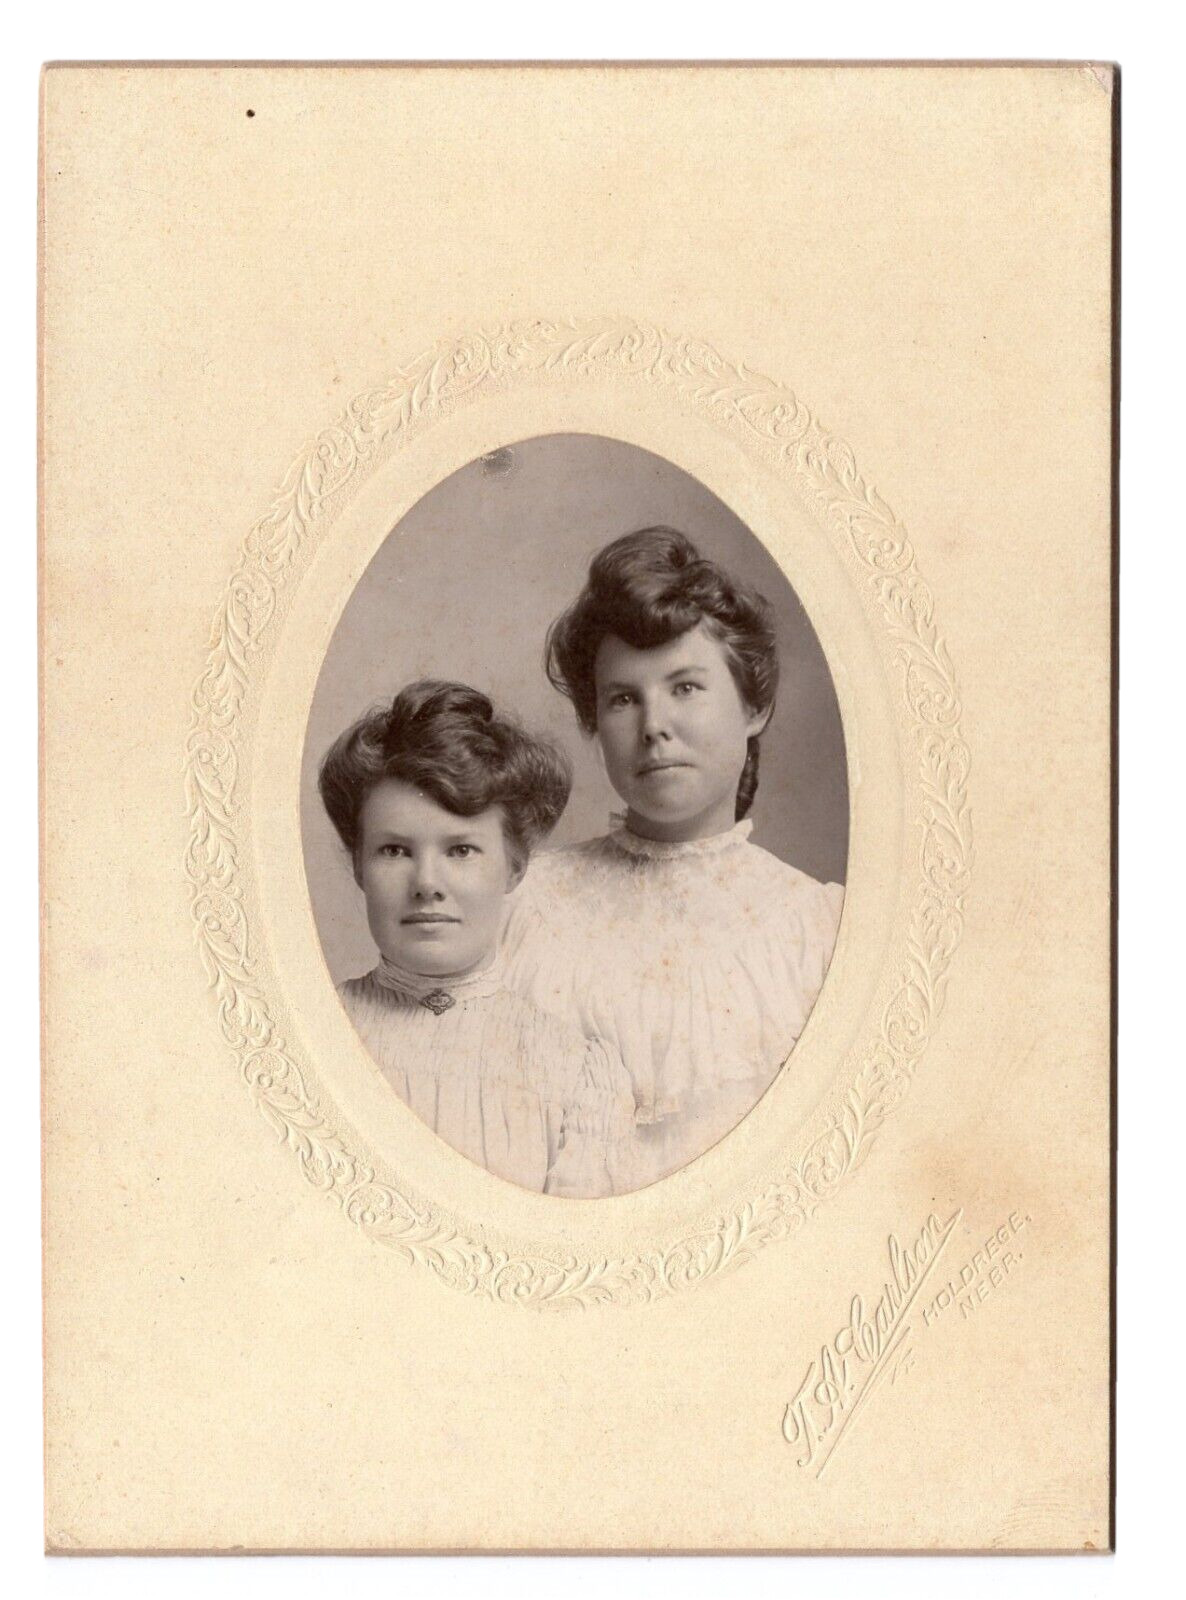 HOLDREGE NEBRASKA 1900-1909 SISTERS FAMILY Victorian Cabinet Card by CARLSON